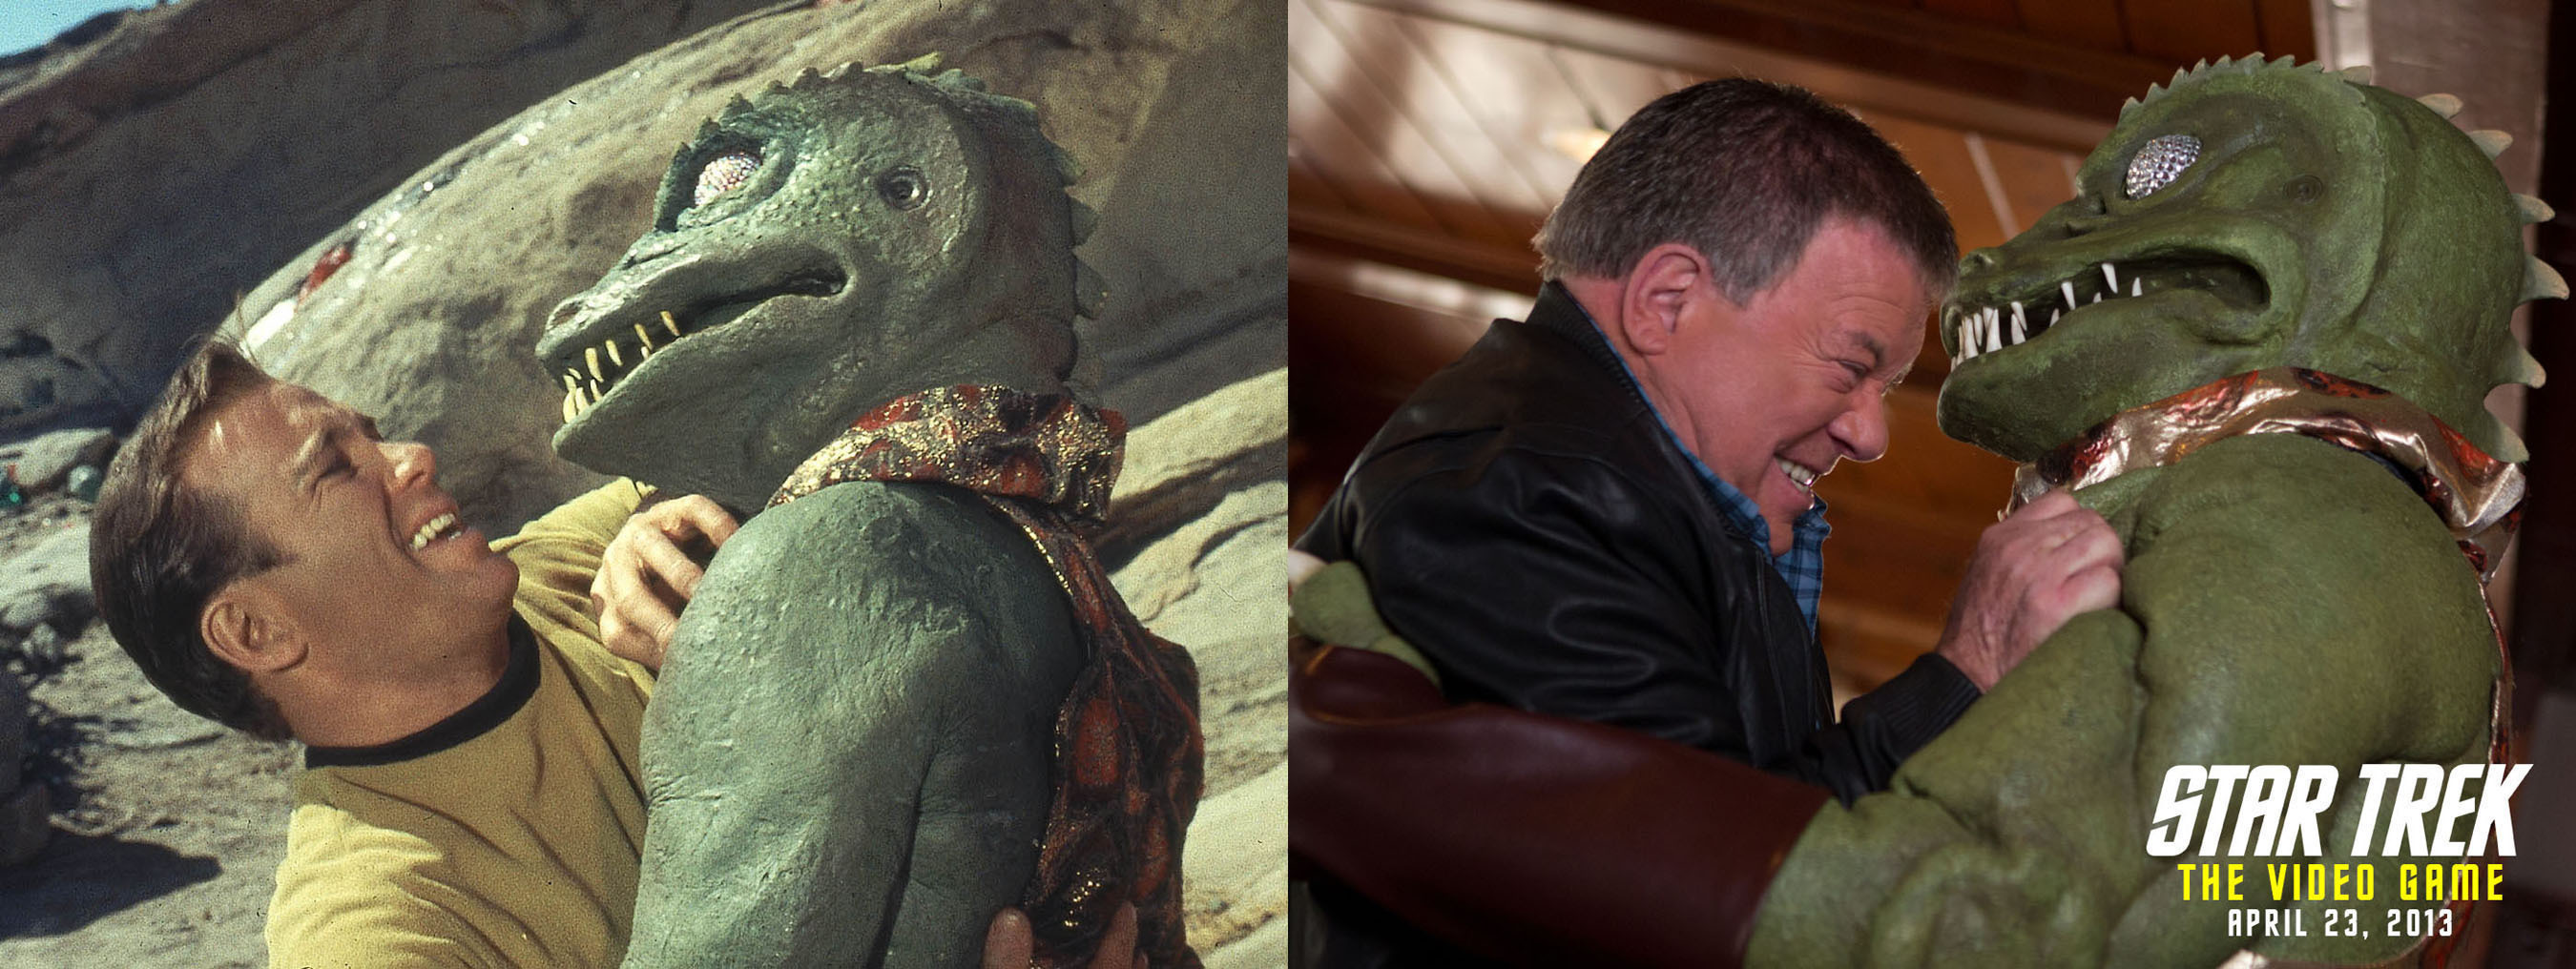 William Shatner and his Gorn co-star in the classic Star Trek episode "Arena" (1967) and now (2013). (PRNewsFoto/Paramount Pictures Corporation) (PRNewsFoto/PARAMOUNT PICTURES CORPORATION)